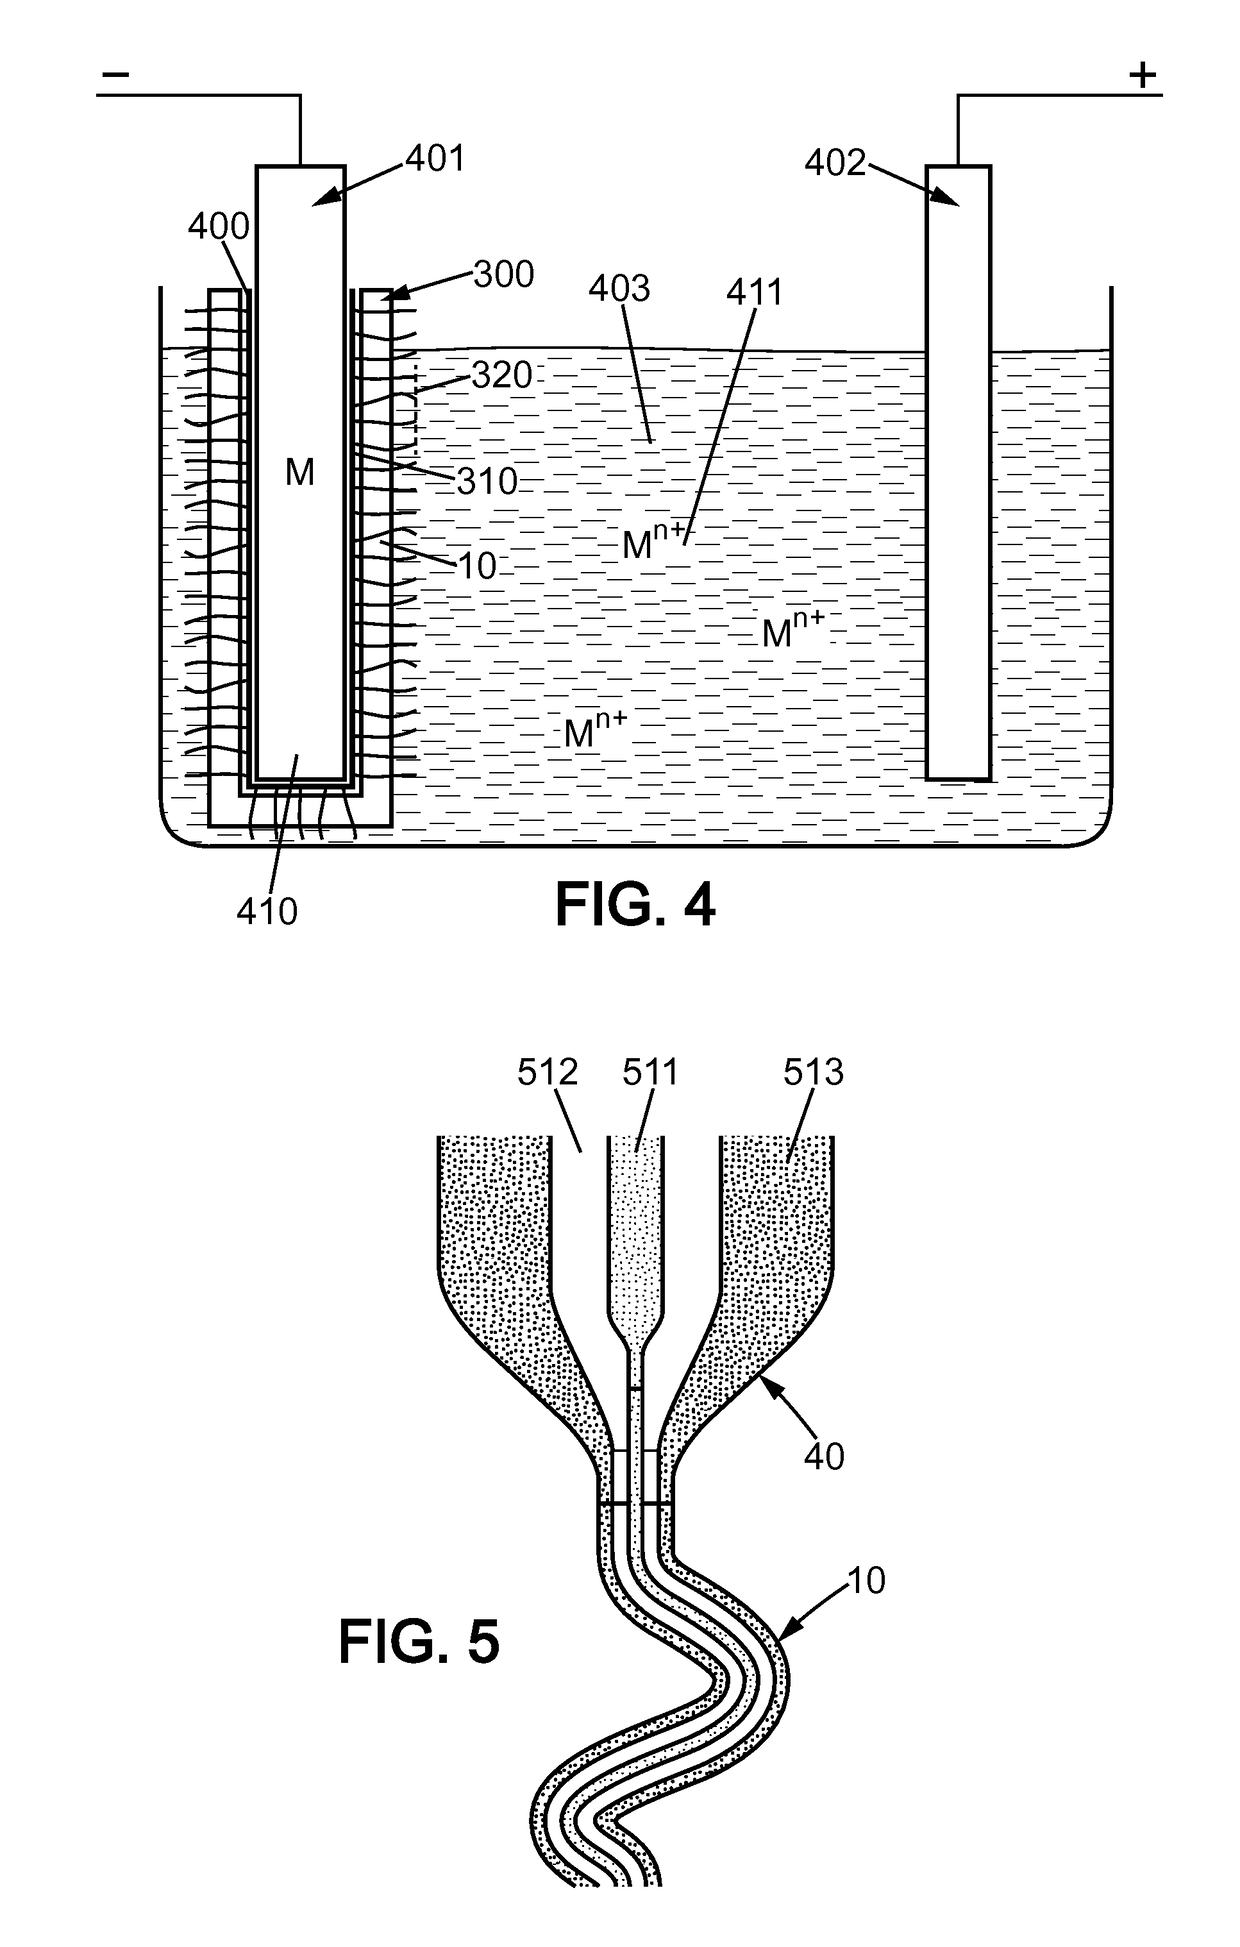 Method for producing a waterproof and ion-conducting flexible membrane